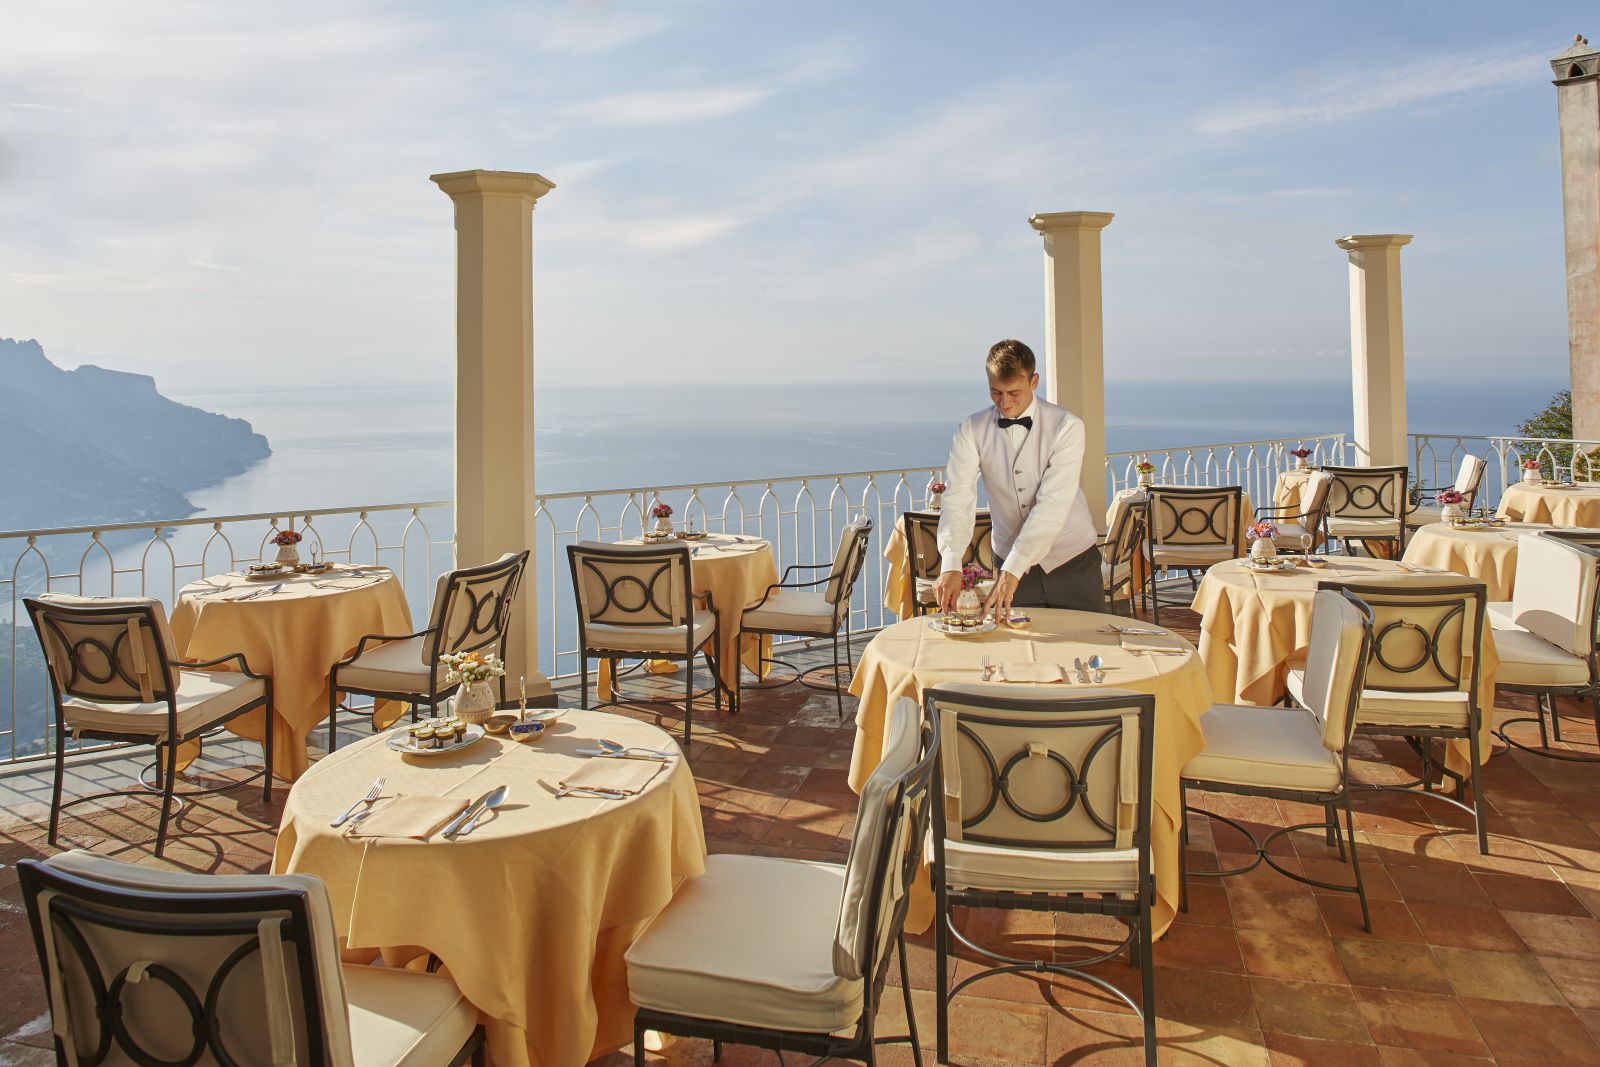 Outdoor dining with Amalfi Coast views at Belmond Hotel Caruso in Ravello Italy